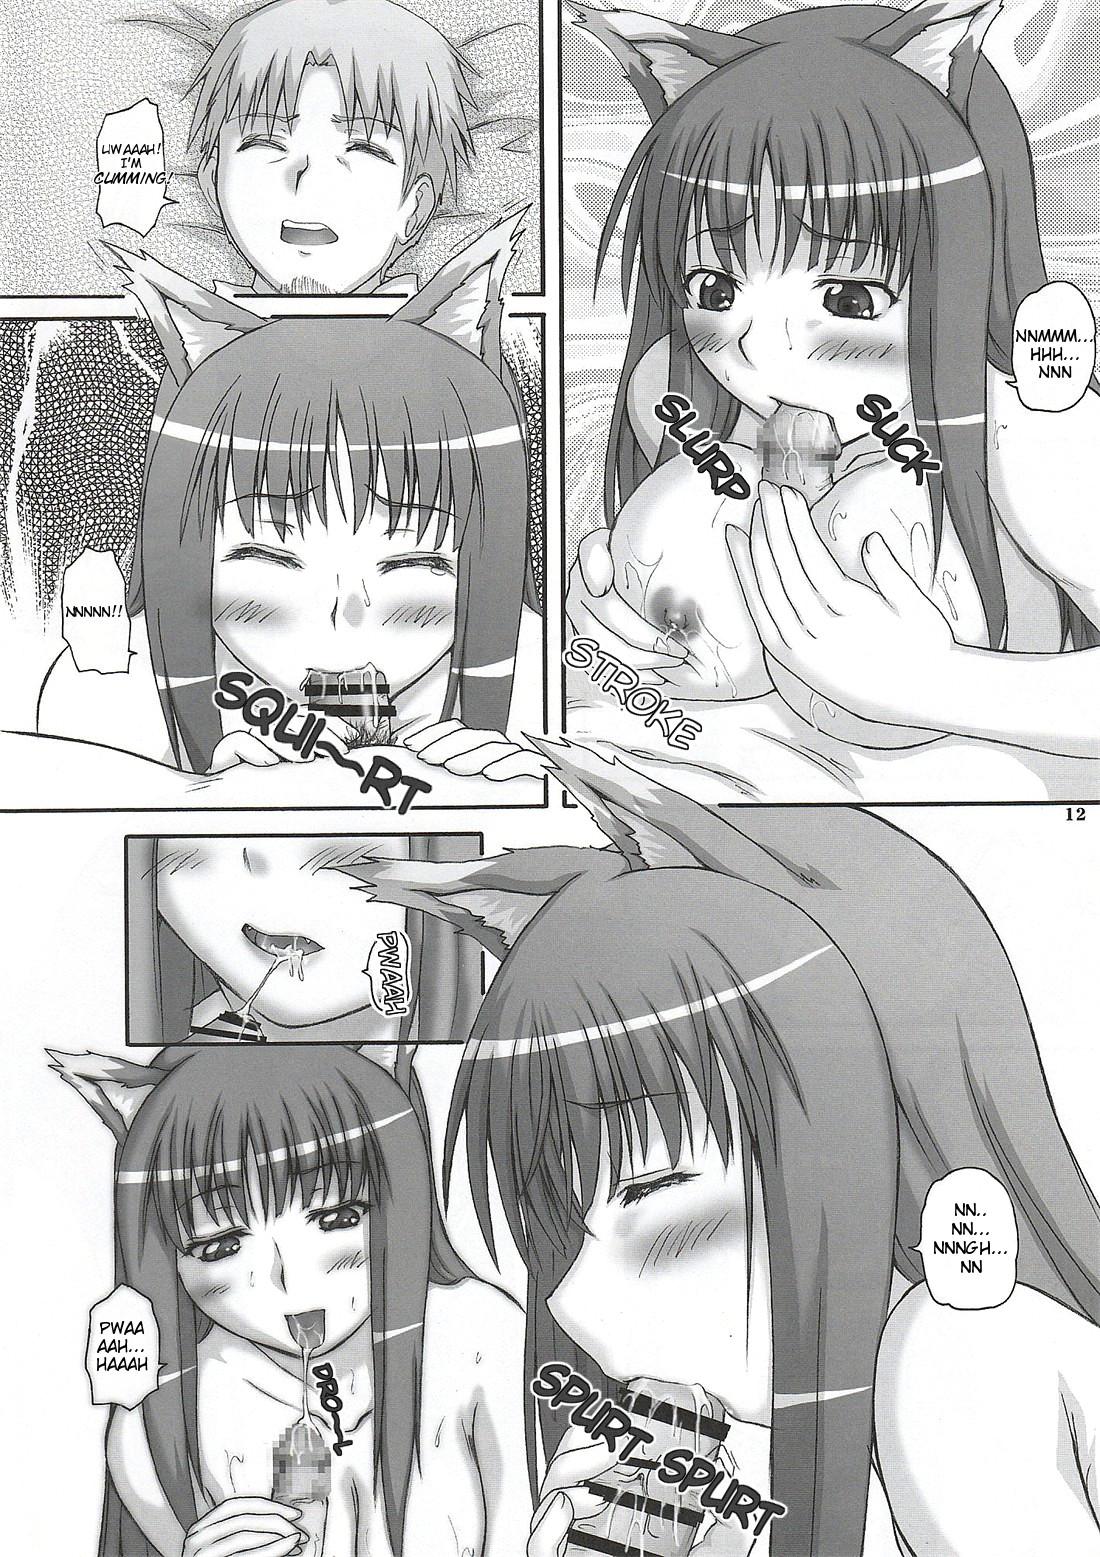 Cojiendo 2Stroke TY - Spice and wolf Stepsister - Page 11